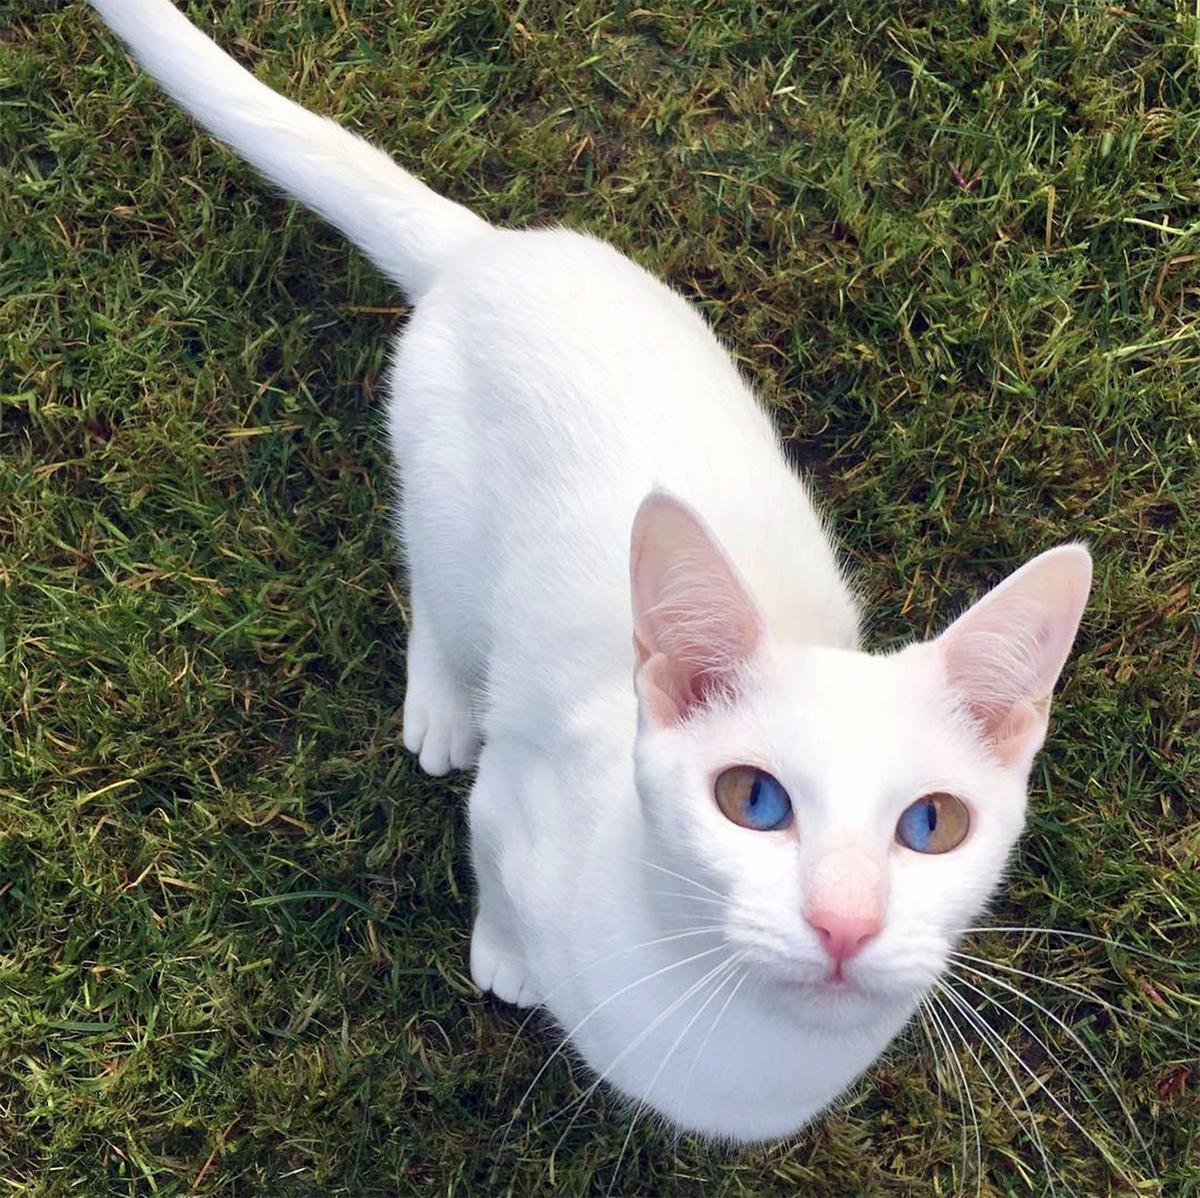 Olive has a condition called sectoral heterochromia, where her eyes are divided into blue and yellow hemispheres. (Caters News)